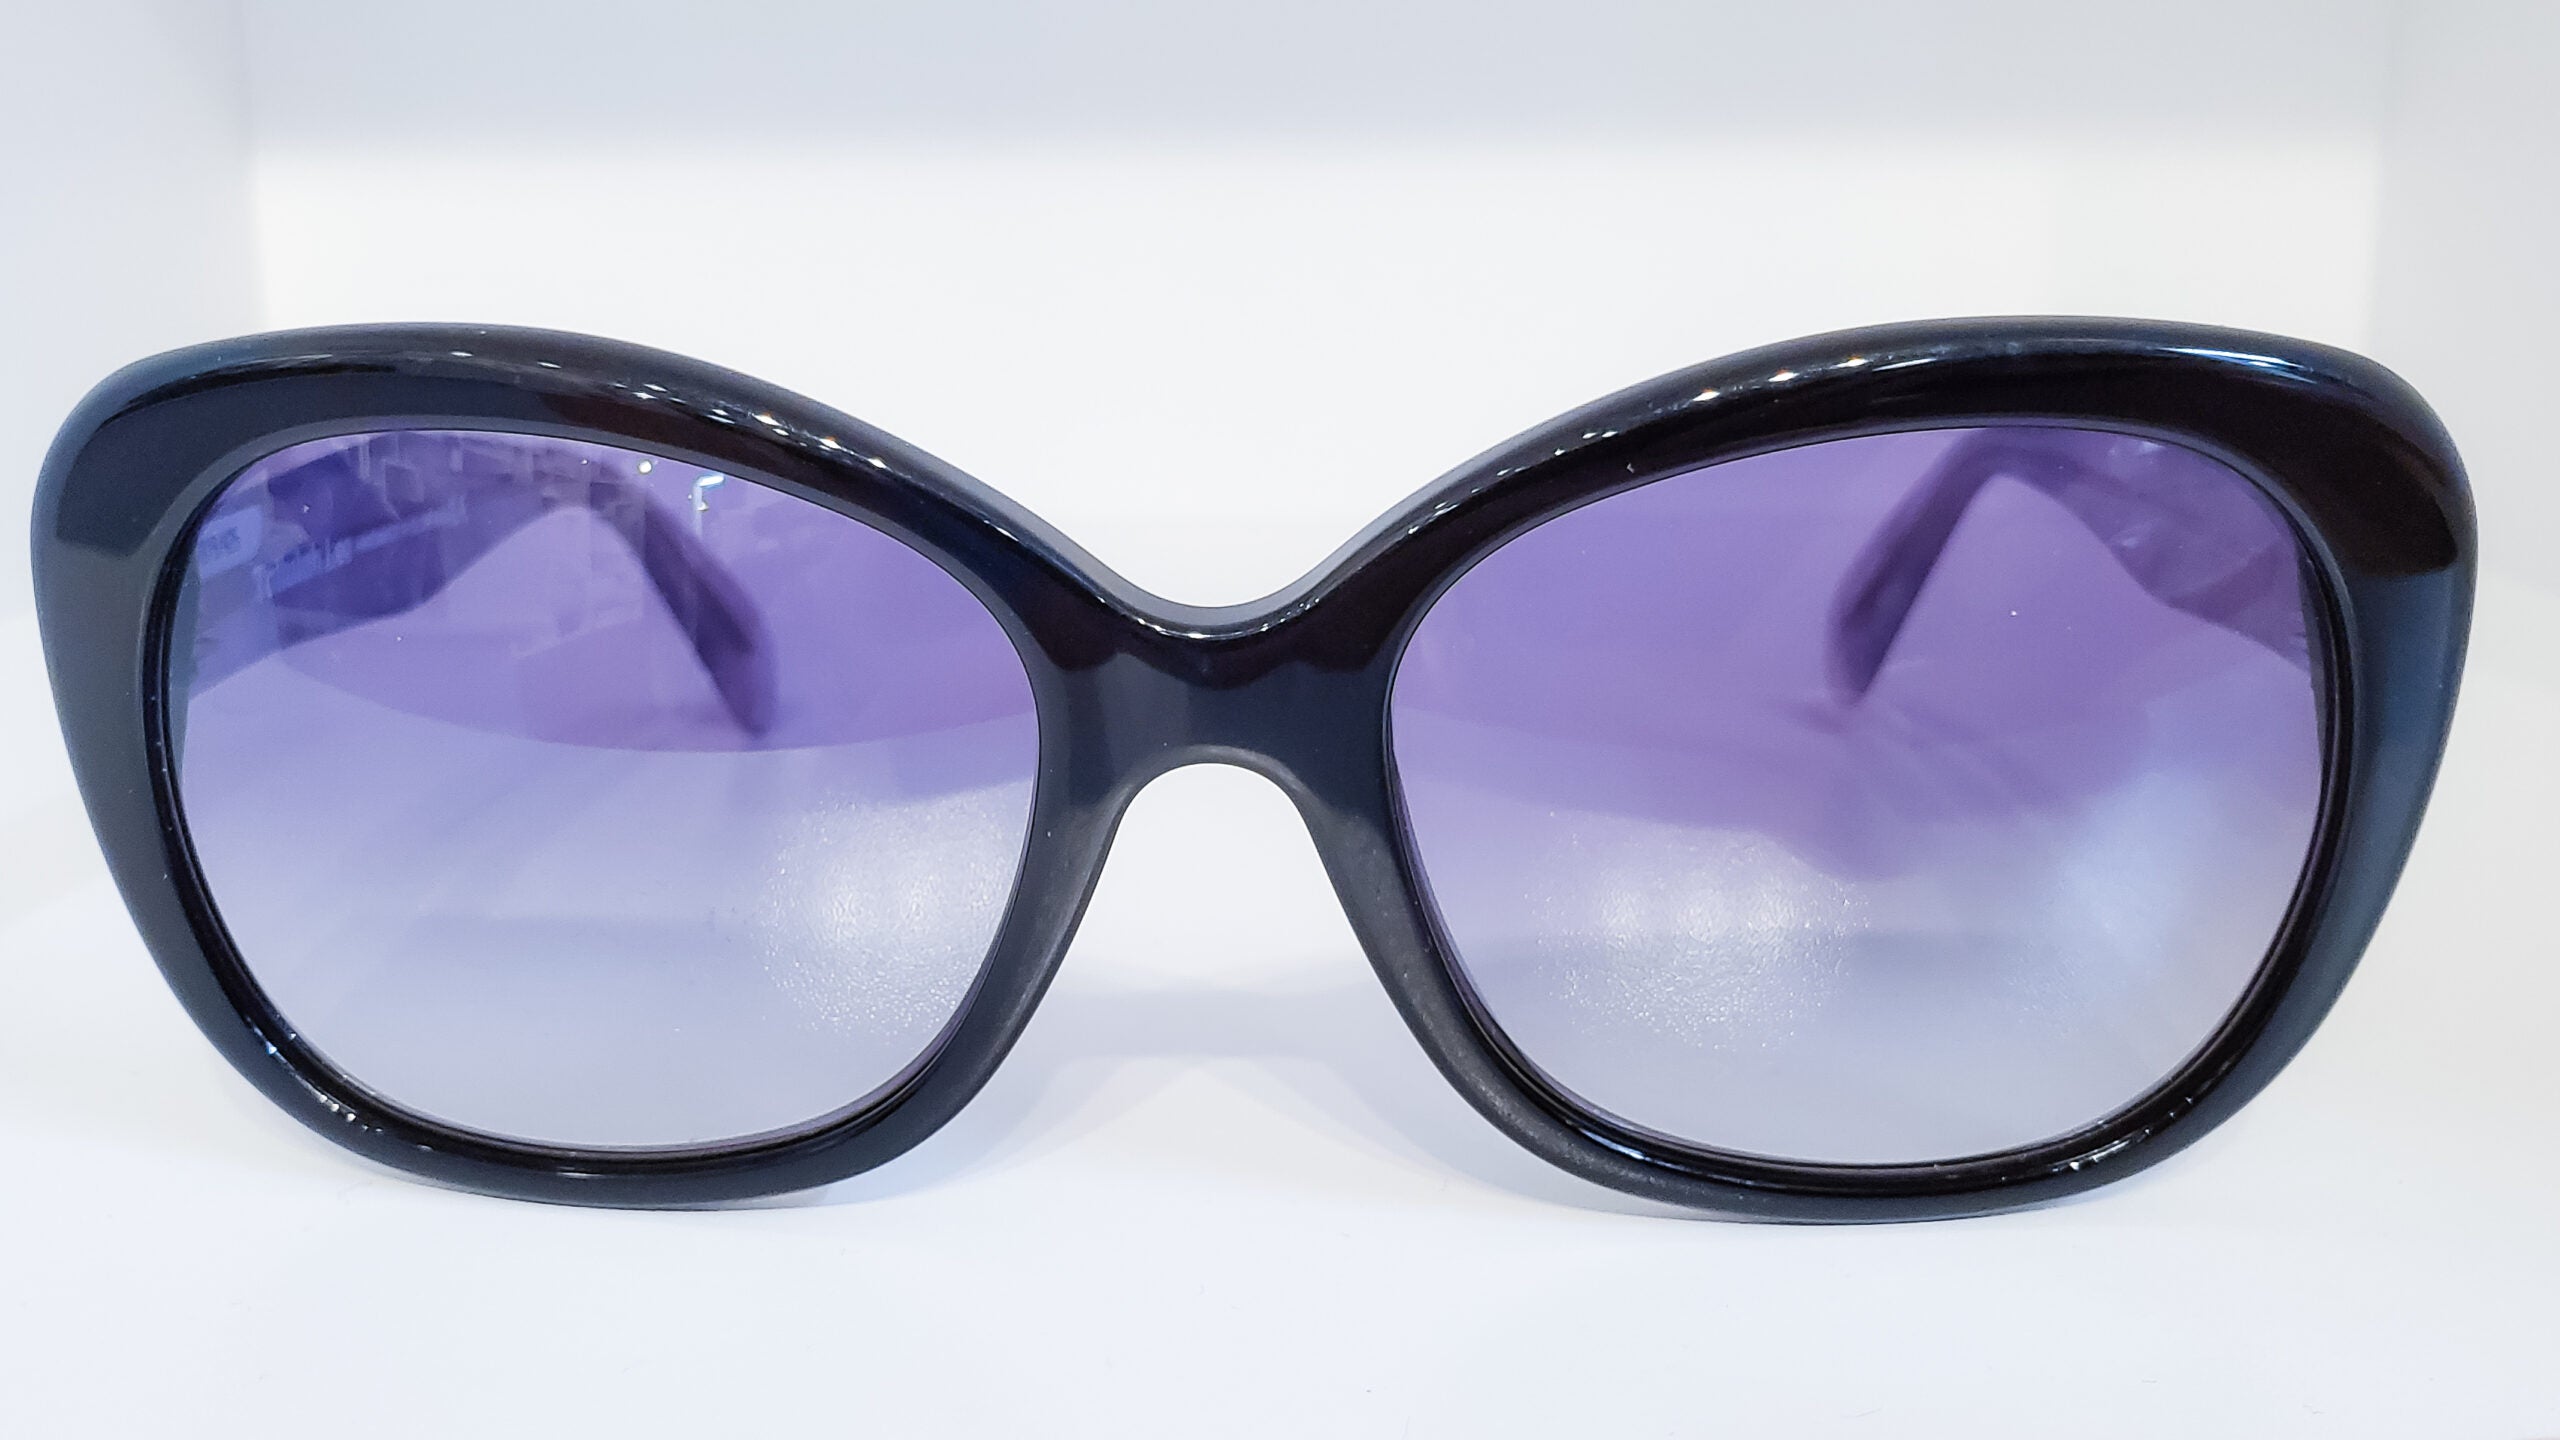 The Retro Butterfly Sunglasses – Tallulah Lee